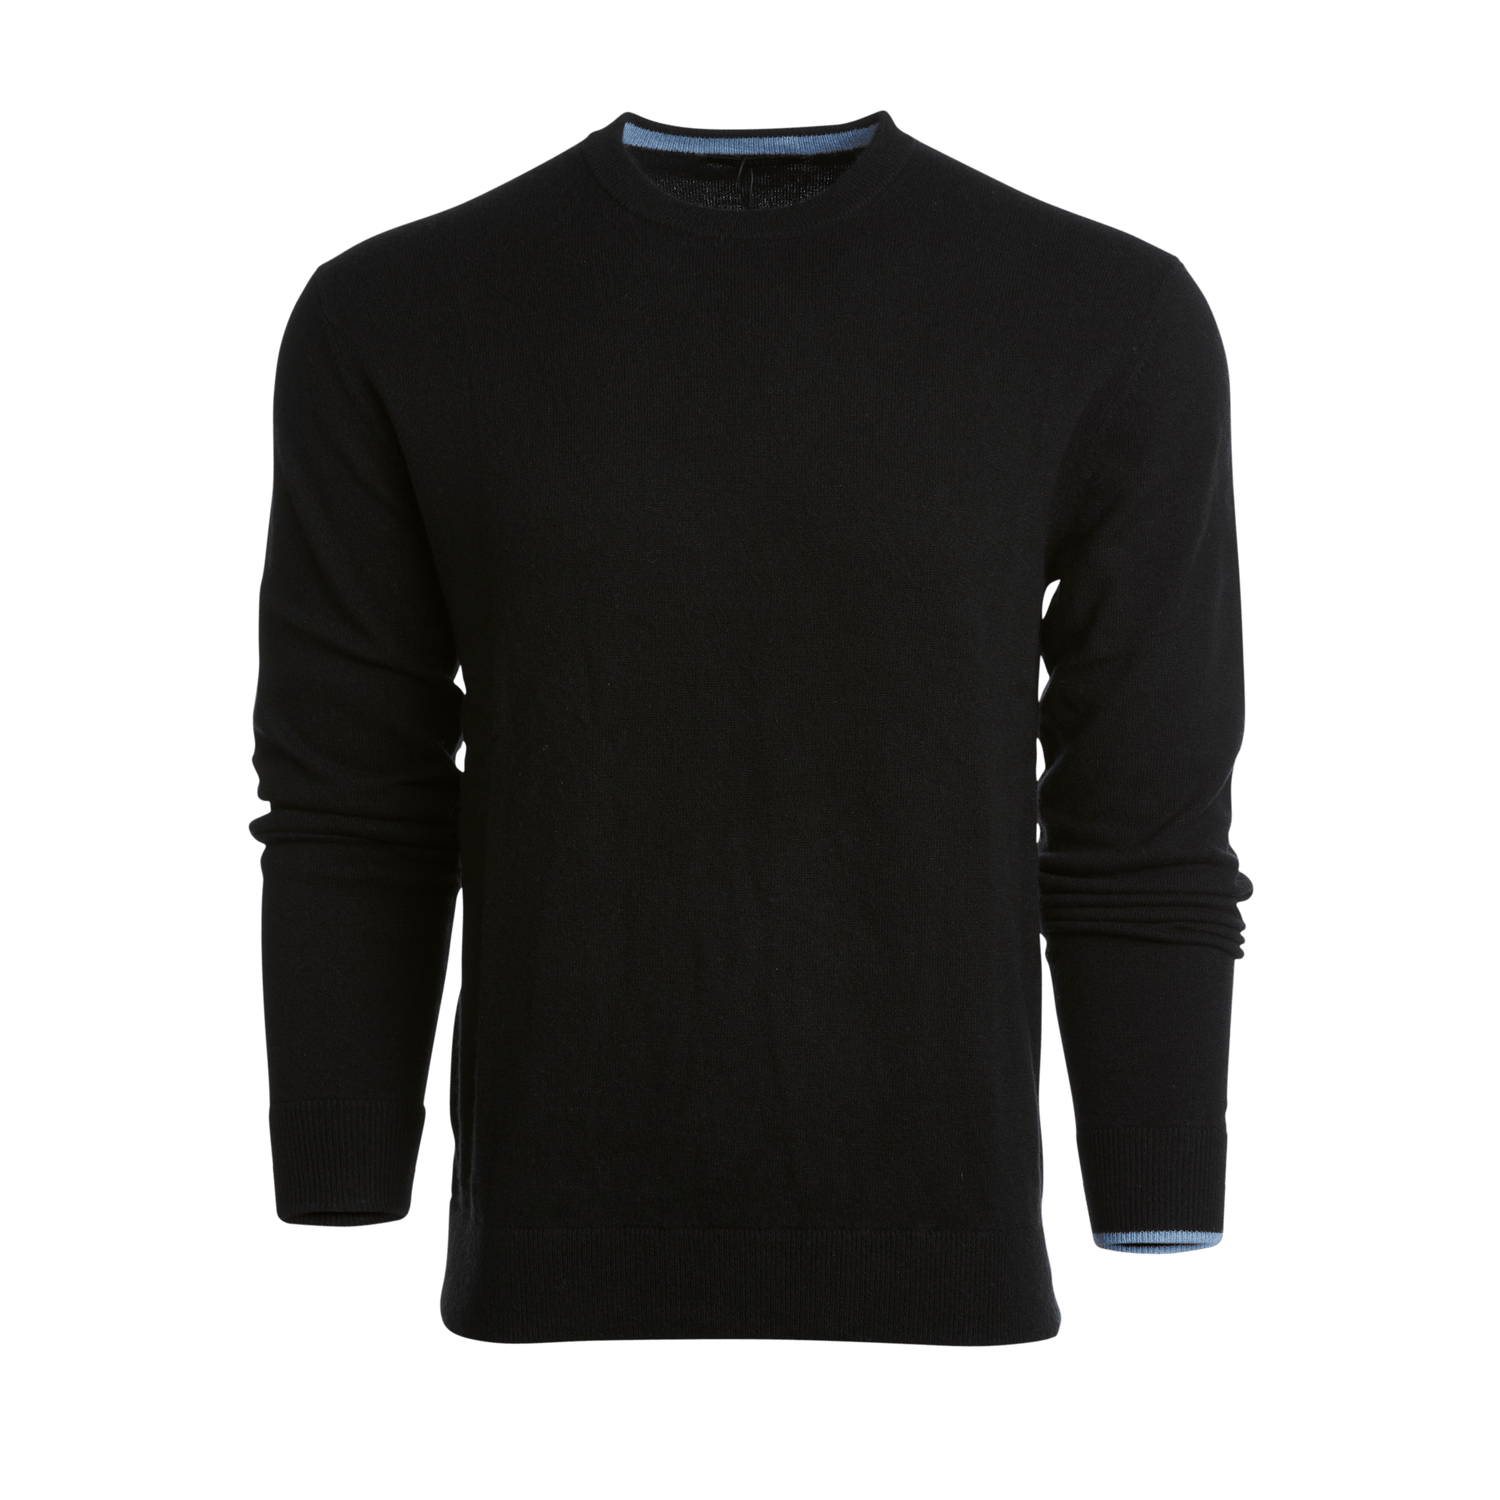 Tomahawk Cashmere Crewneck Sweater Child Products